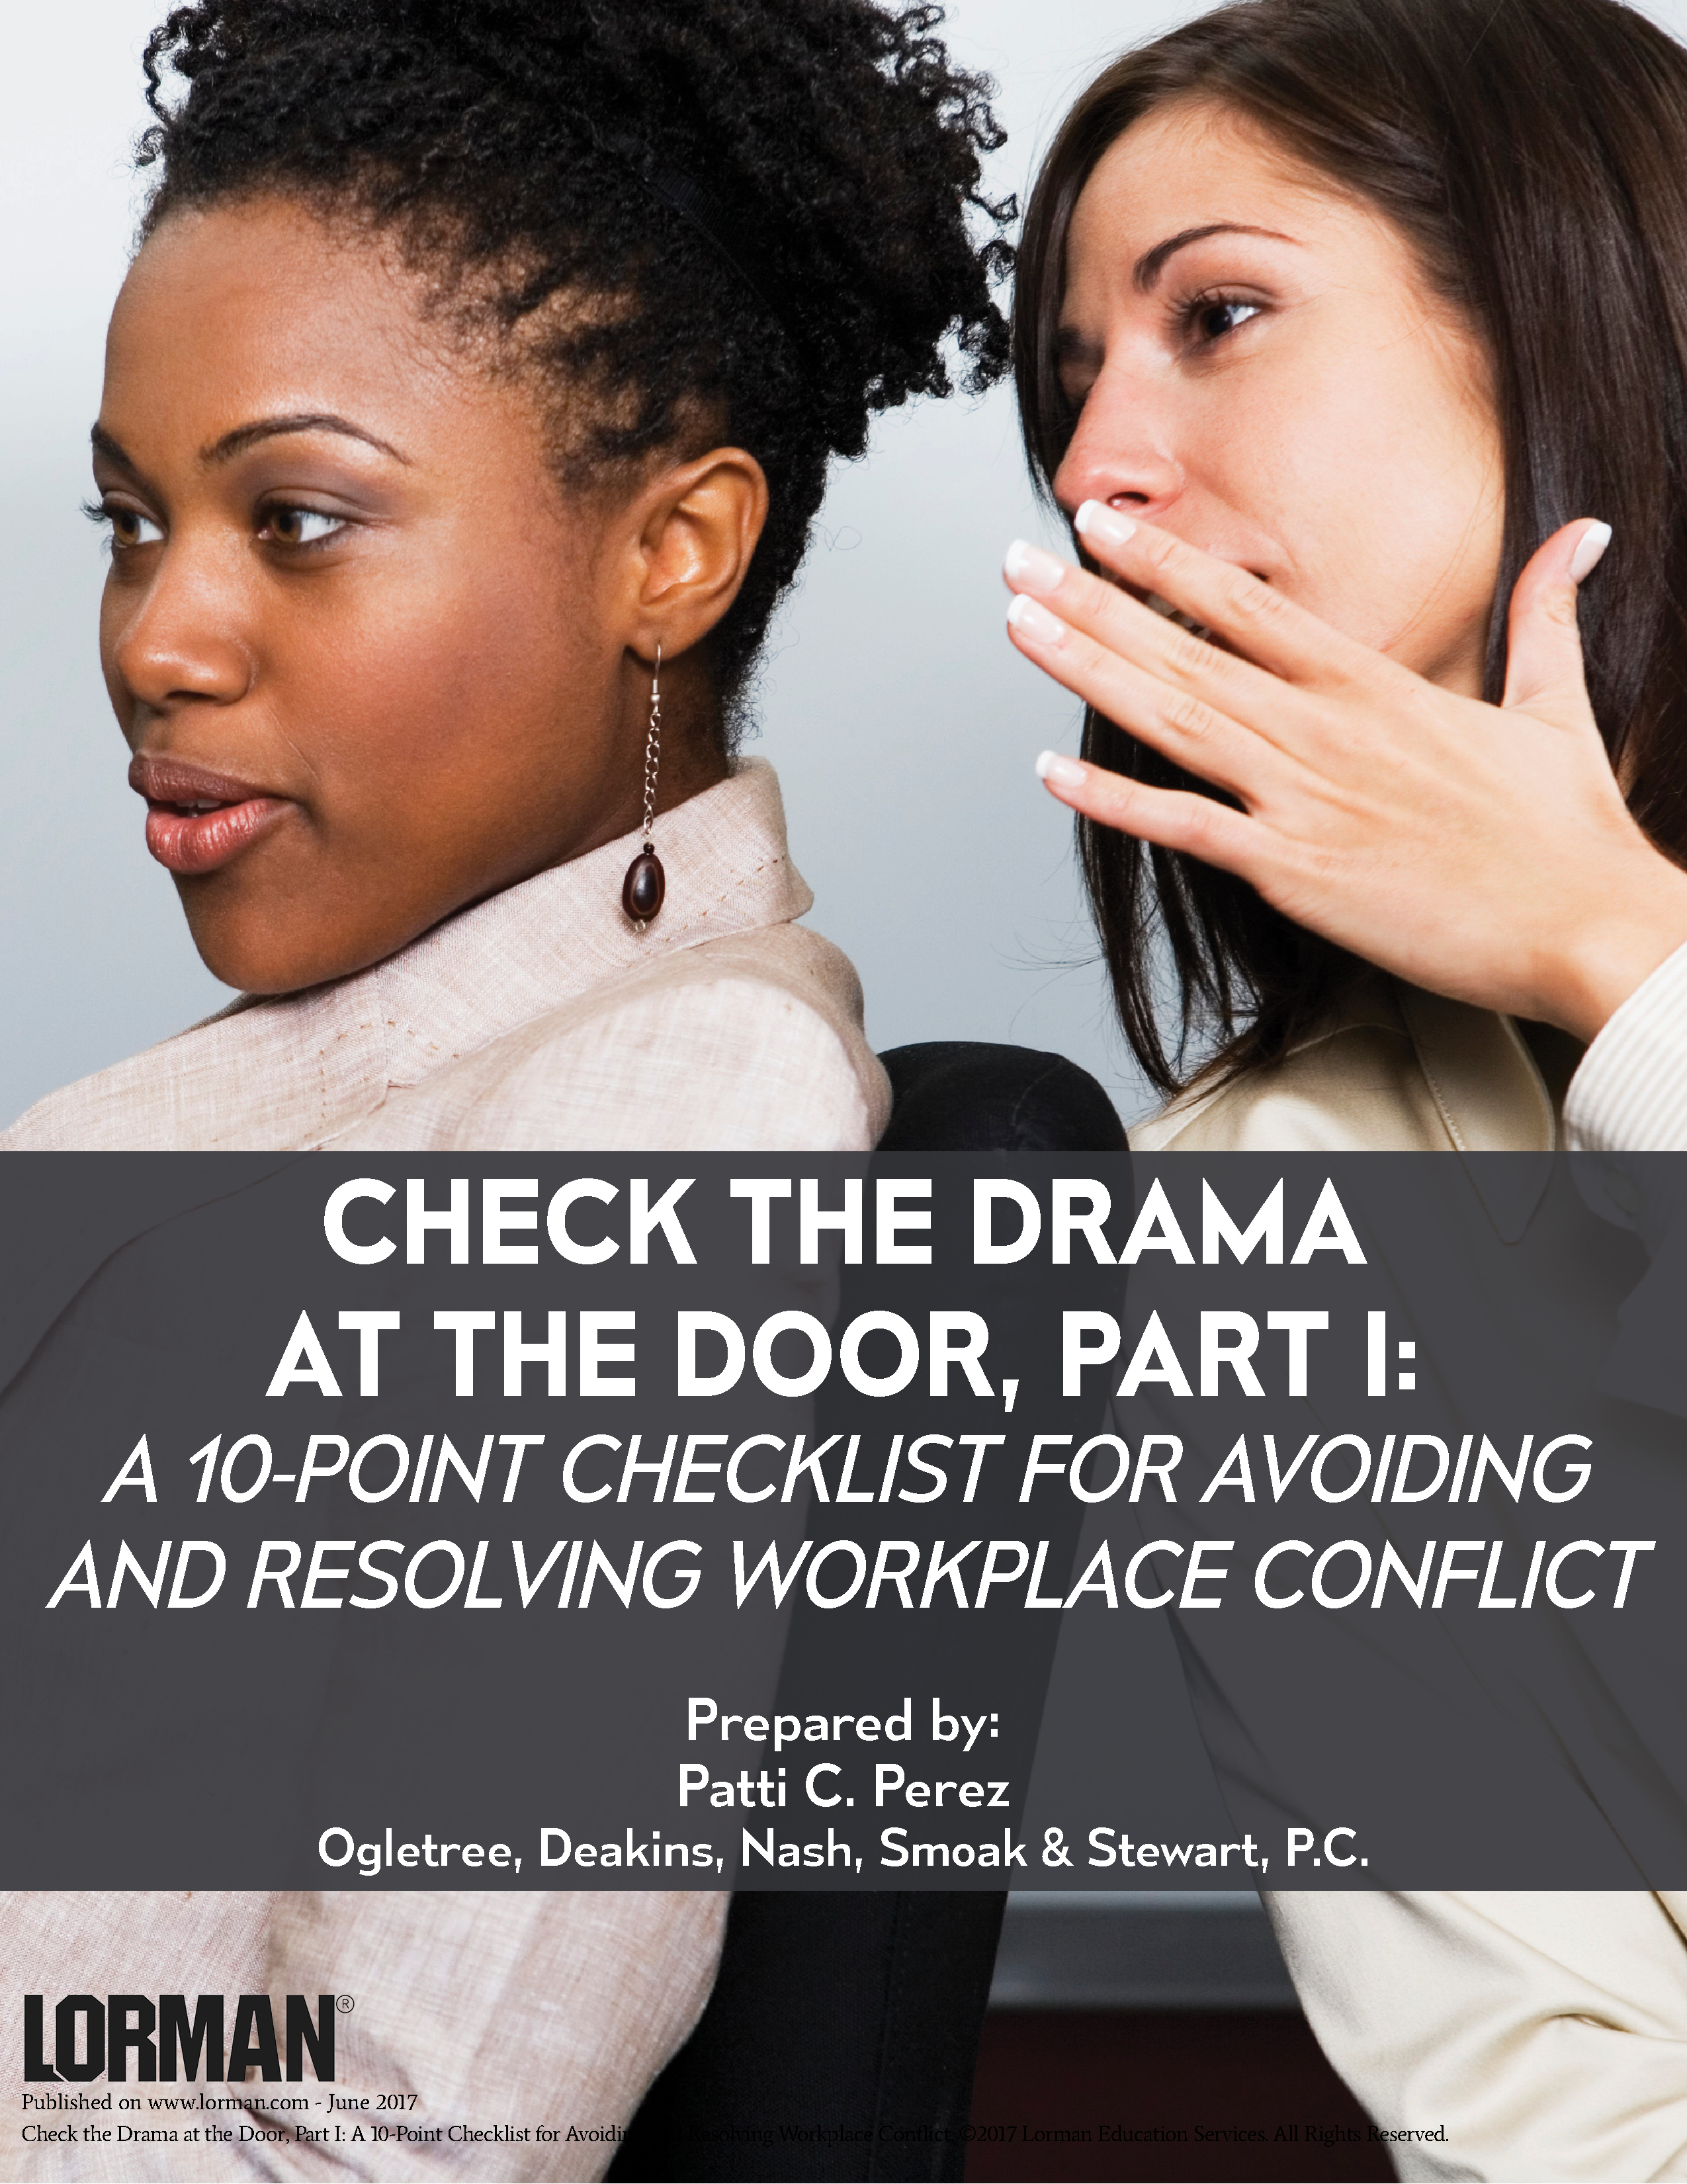 Check the Drama at the Door - Part 1: 10-Point Checklist to Avoid and Resolve Workplace Conflict